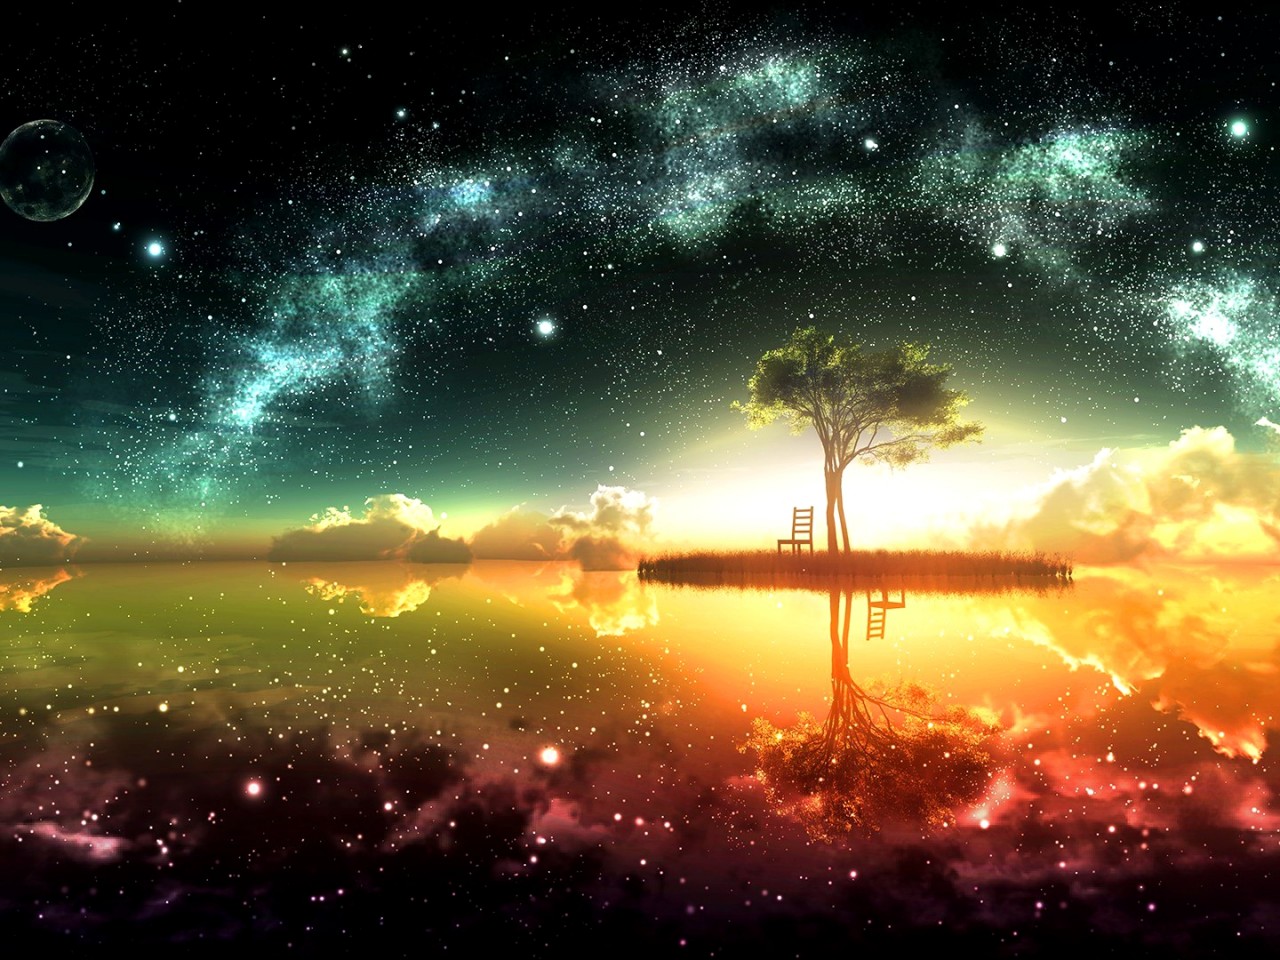 Surreal Wallpaper Hd - Space Background Pc - HD Wallpaper 